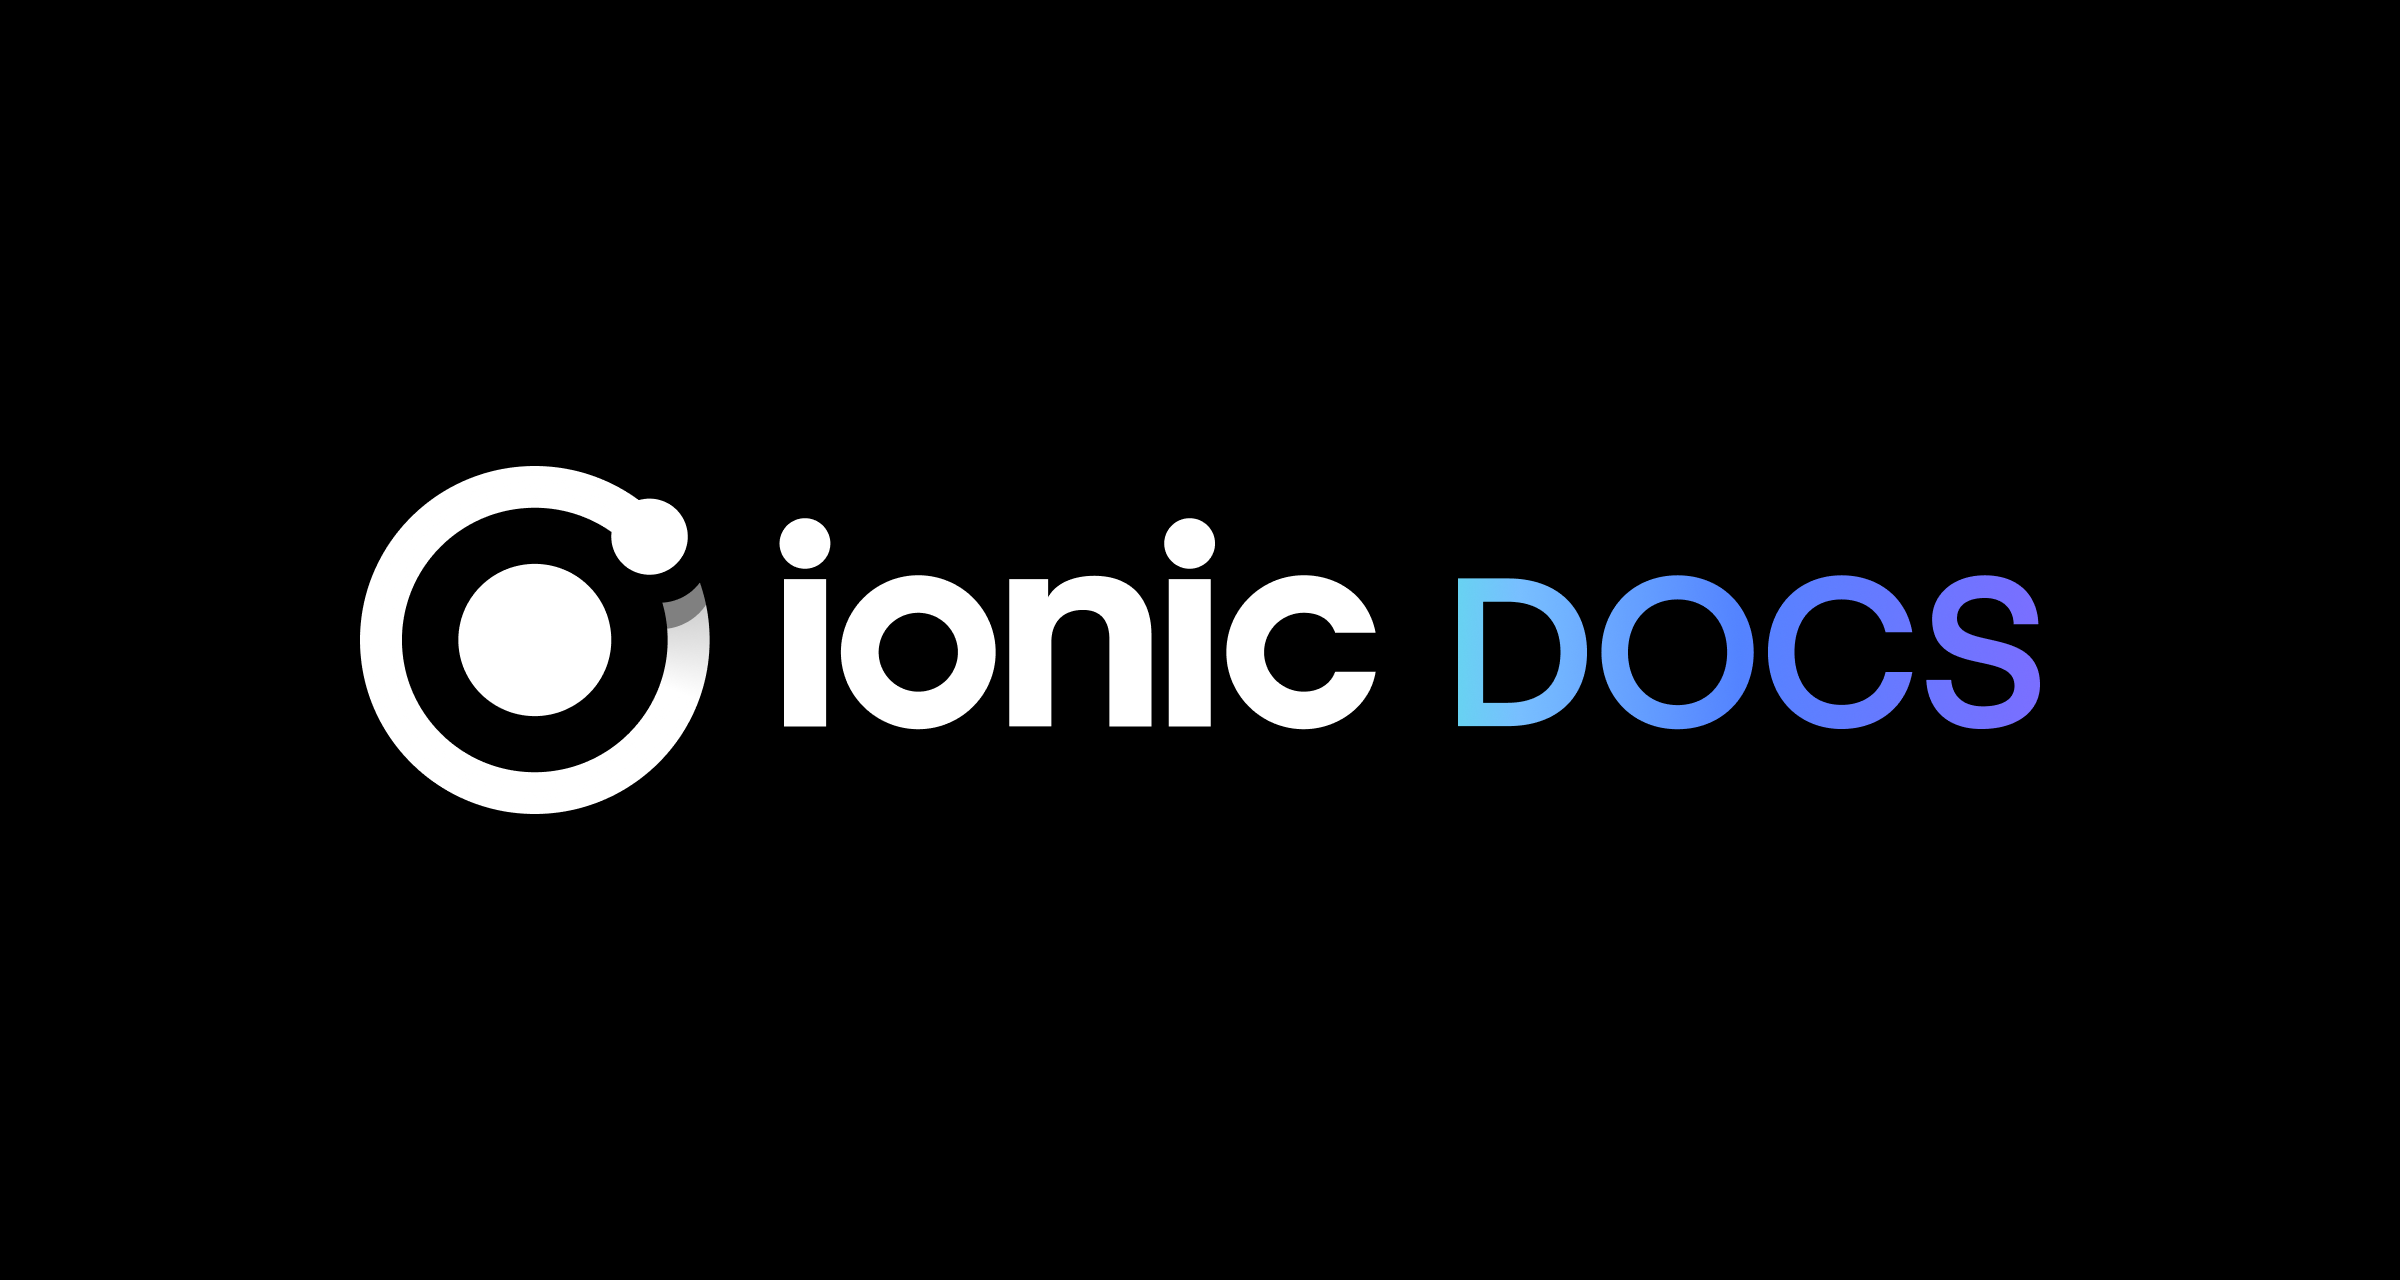 Android Play Store Deployment: Publish Your Ionic Apps